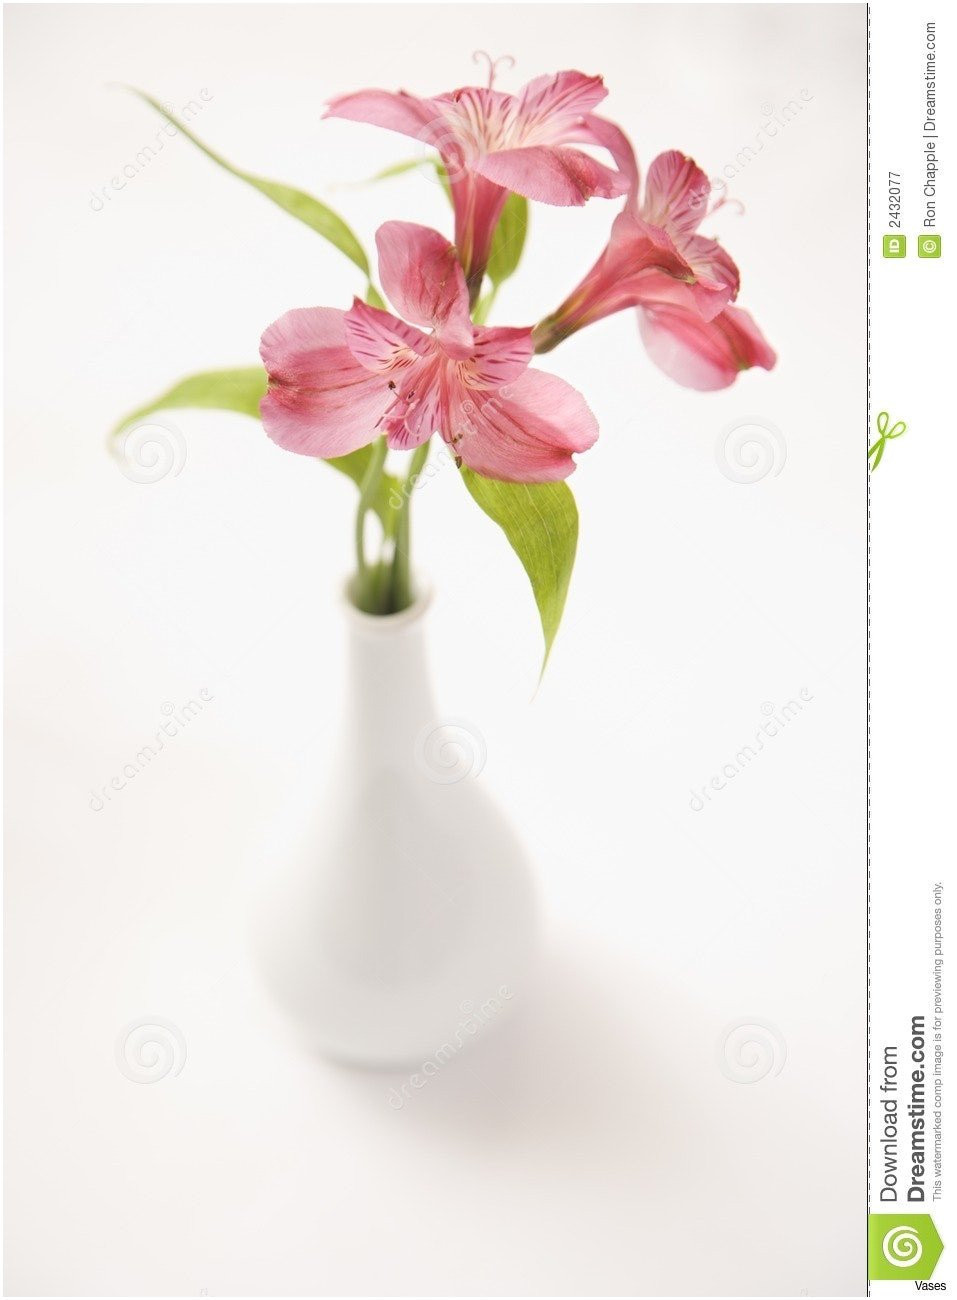 16 attractive Still Life Vase Of Flowers 2024 free download still life vase of flowers of 16 lovely flowers in a tall white vase bogekompresorturkiye com within bridal flowers incredible vase clipart flower 19h vases a with flowers pin 12i 0d curtain